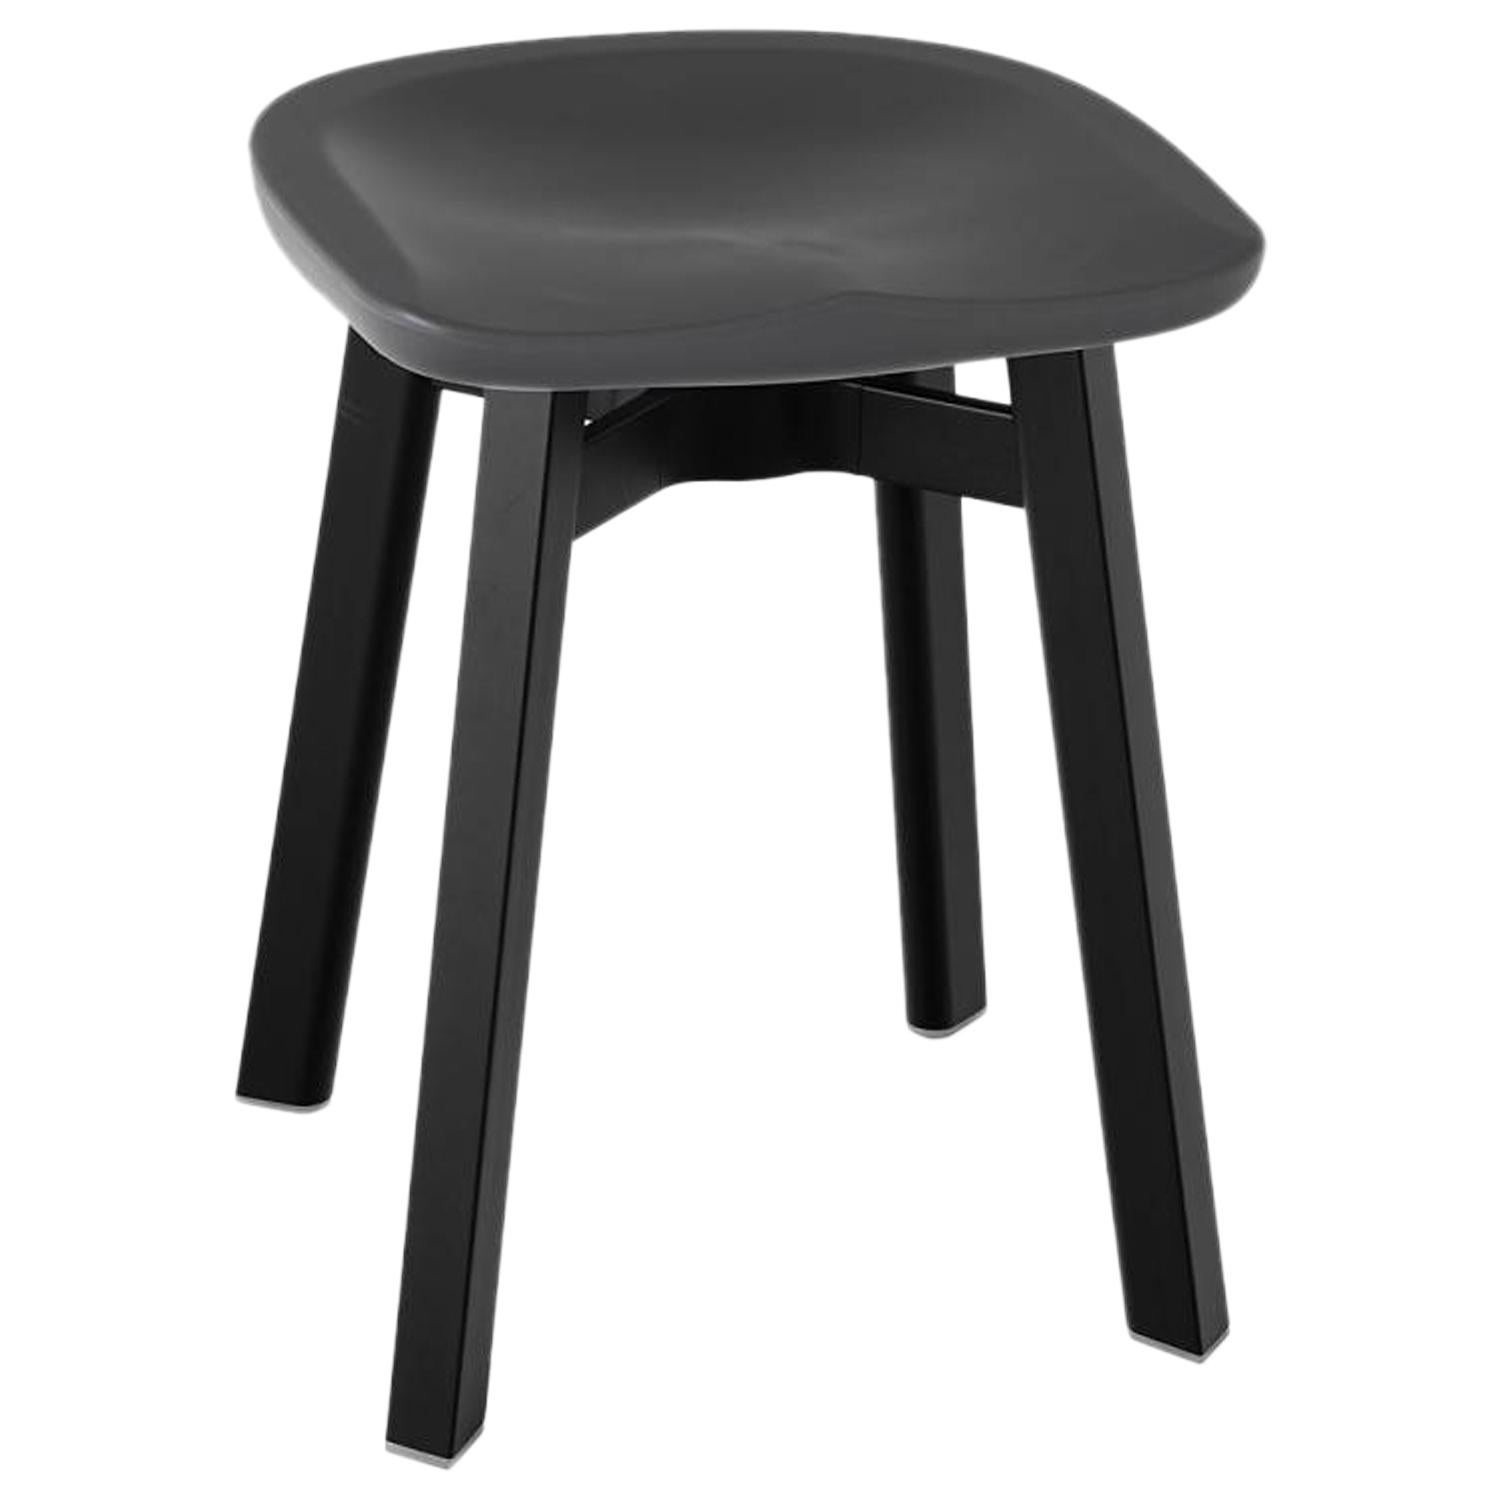 Emeco Su Small Stool in Black Aluminum with Charcoal Seat by Nendo